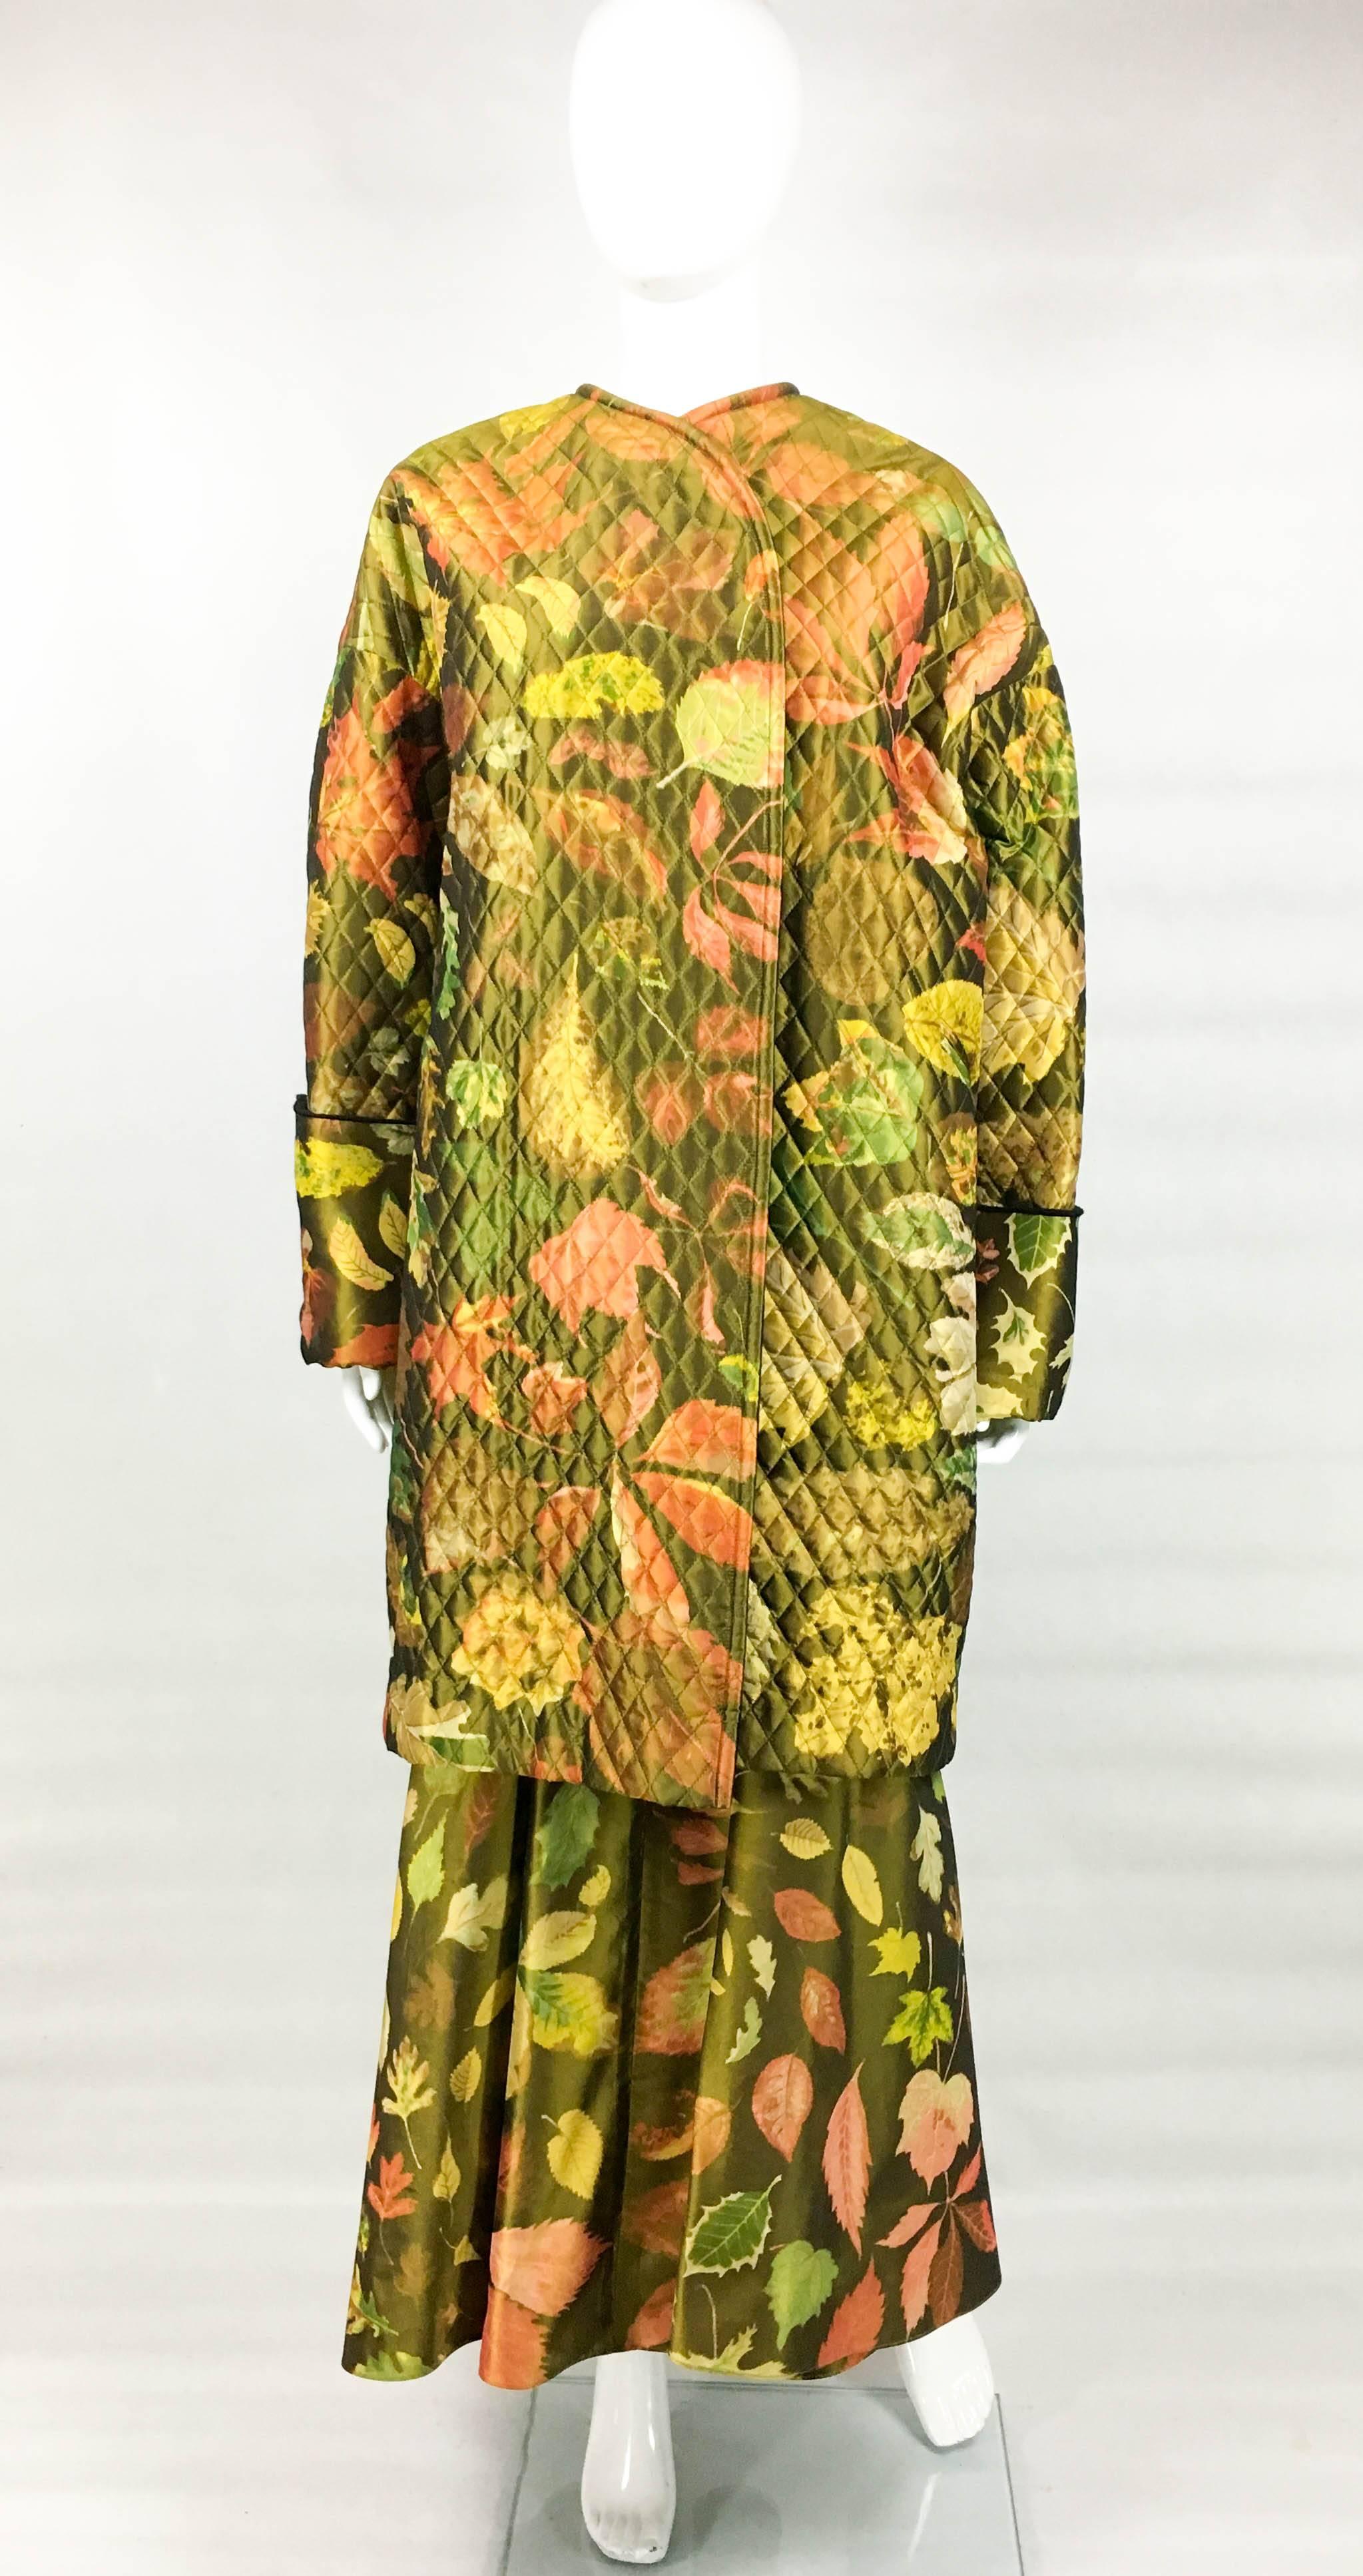 Hermes Printed Silk Coat, Waistcoat and Maxi Skirt Ensemble In Excellent Condition For Sale In London, Chelsea